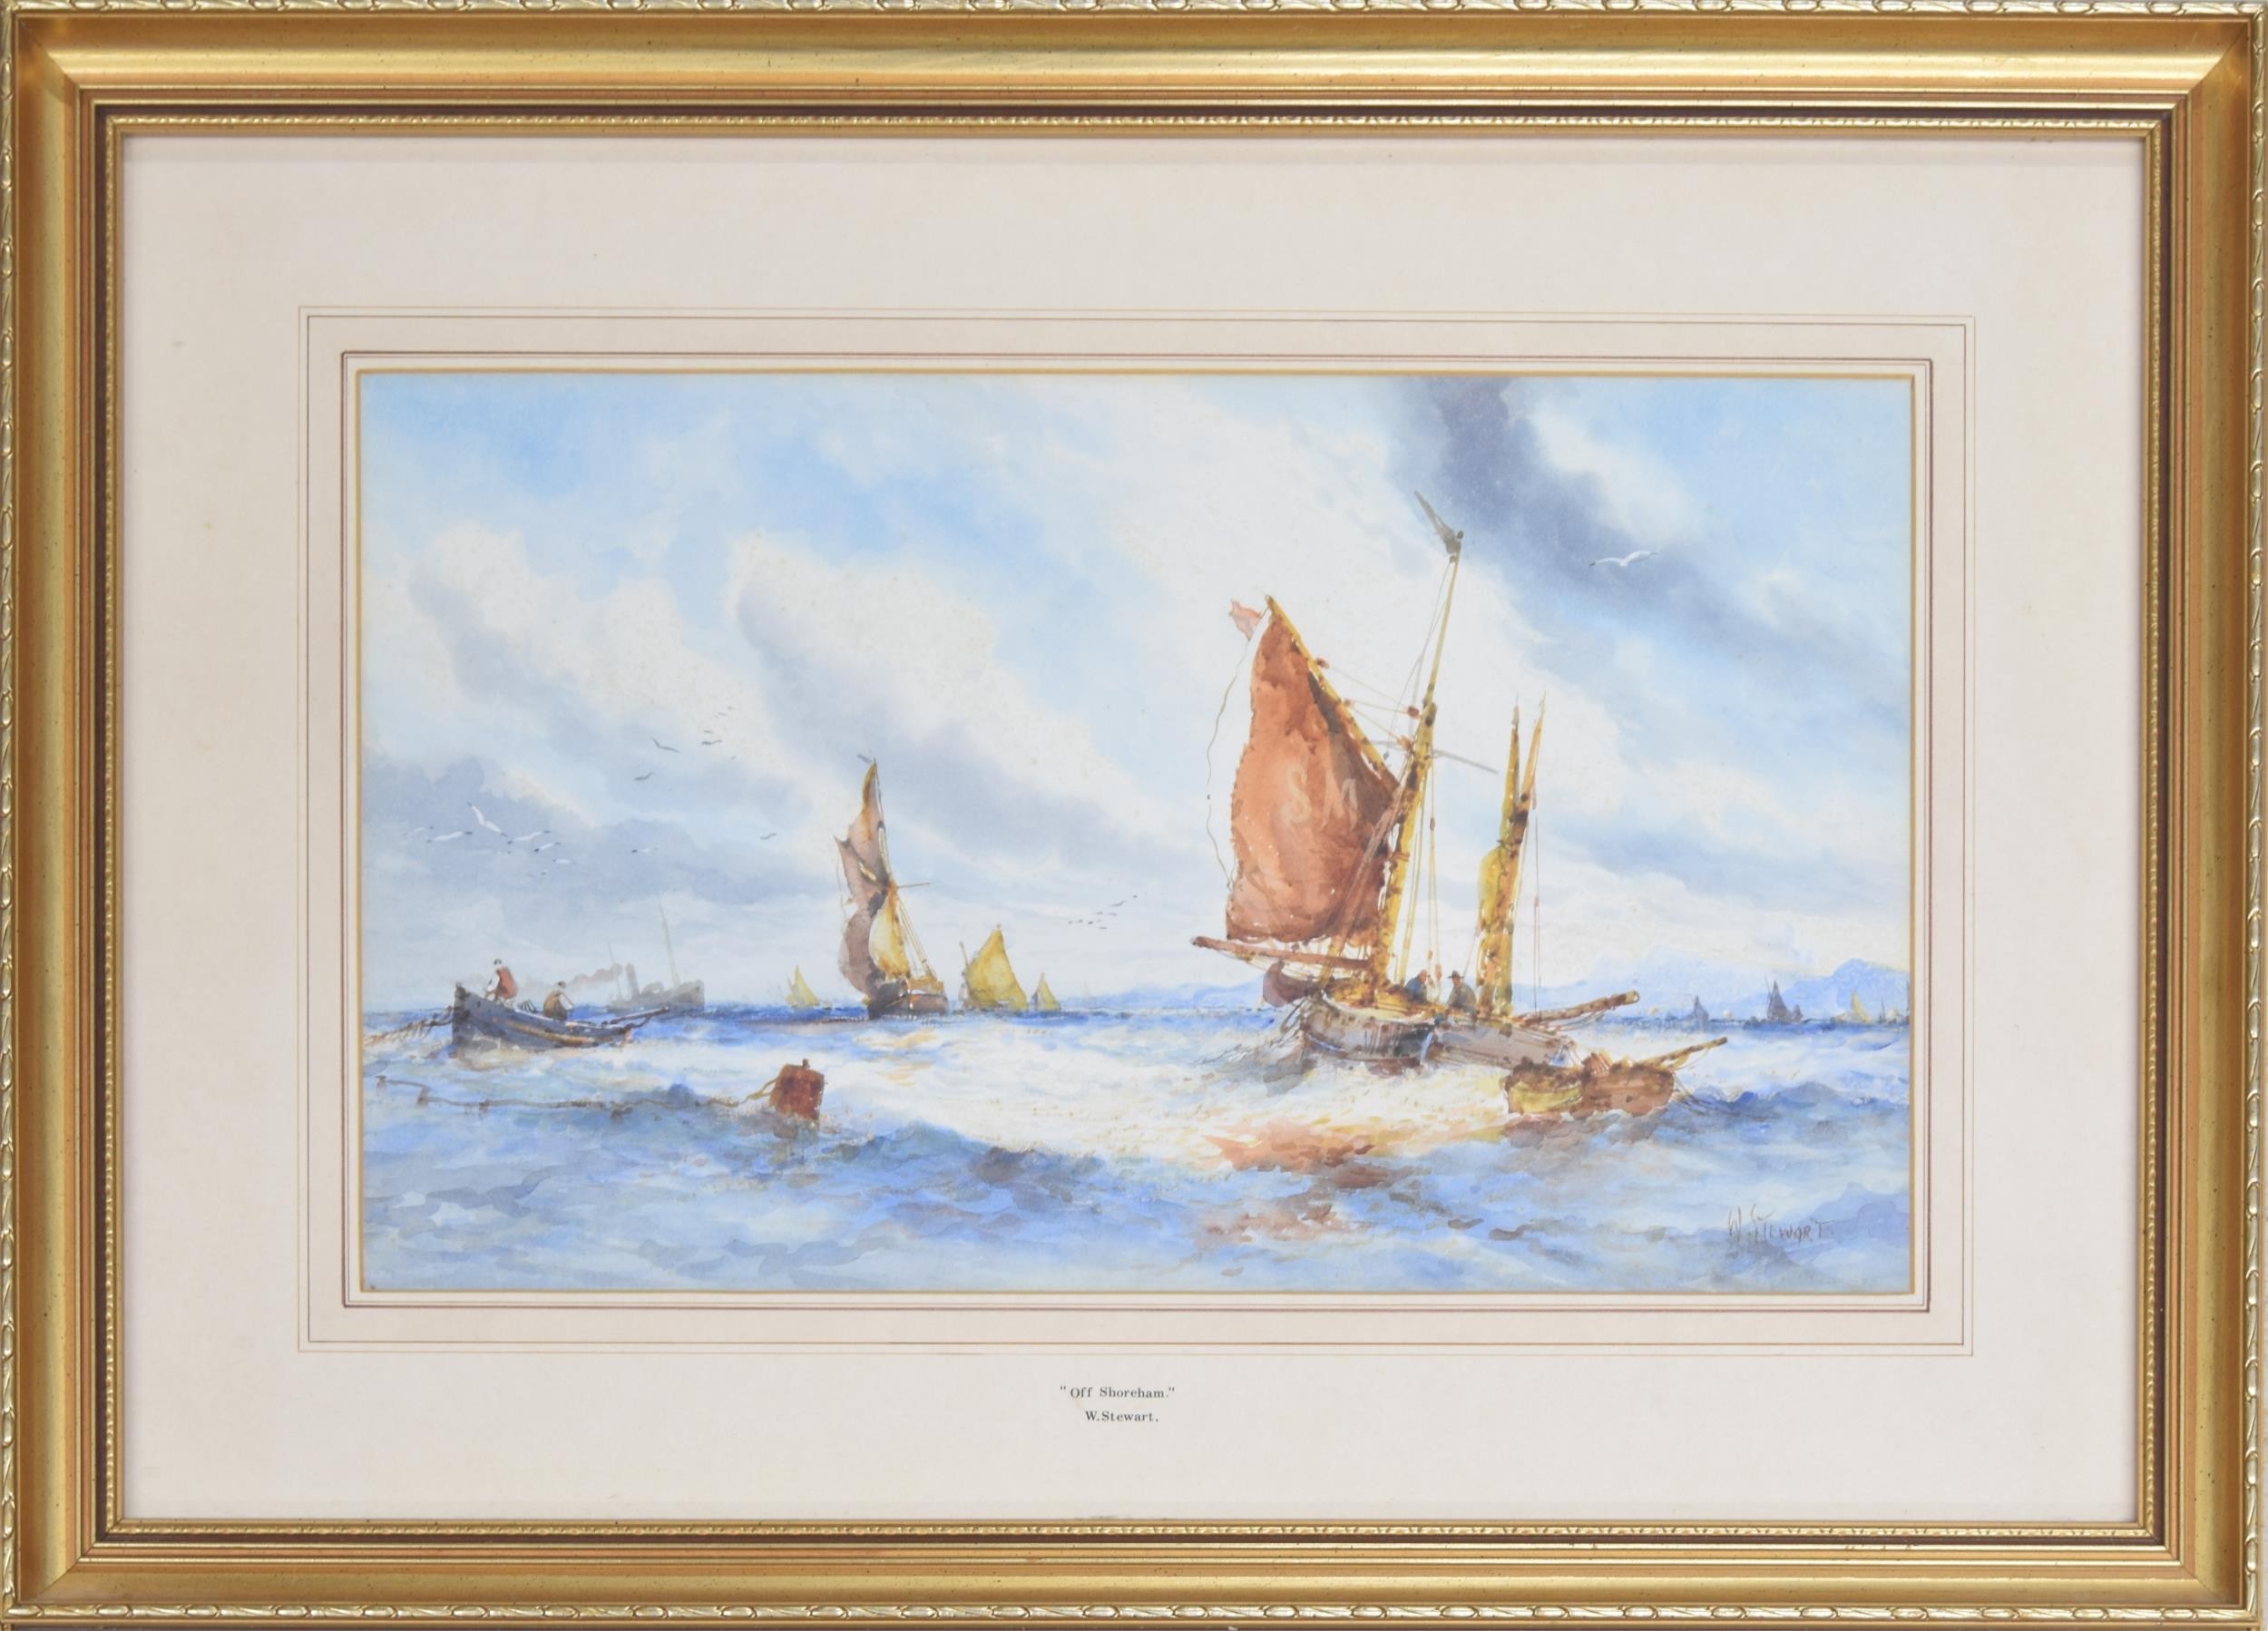 William Stewart (20th/21st century) - 'Off Shoreham', signed also inscribed with the title and the